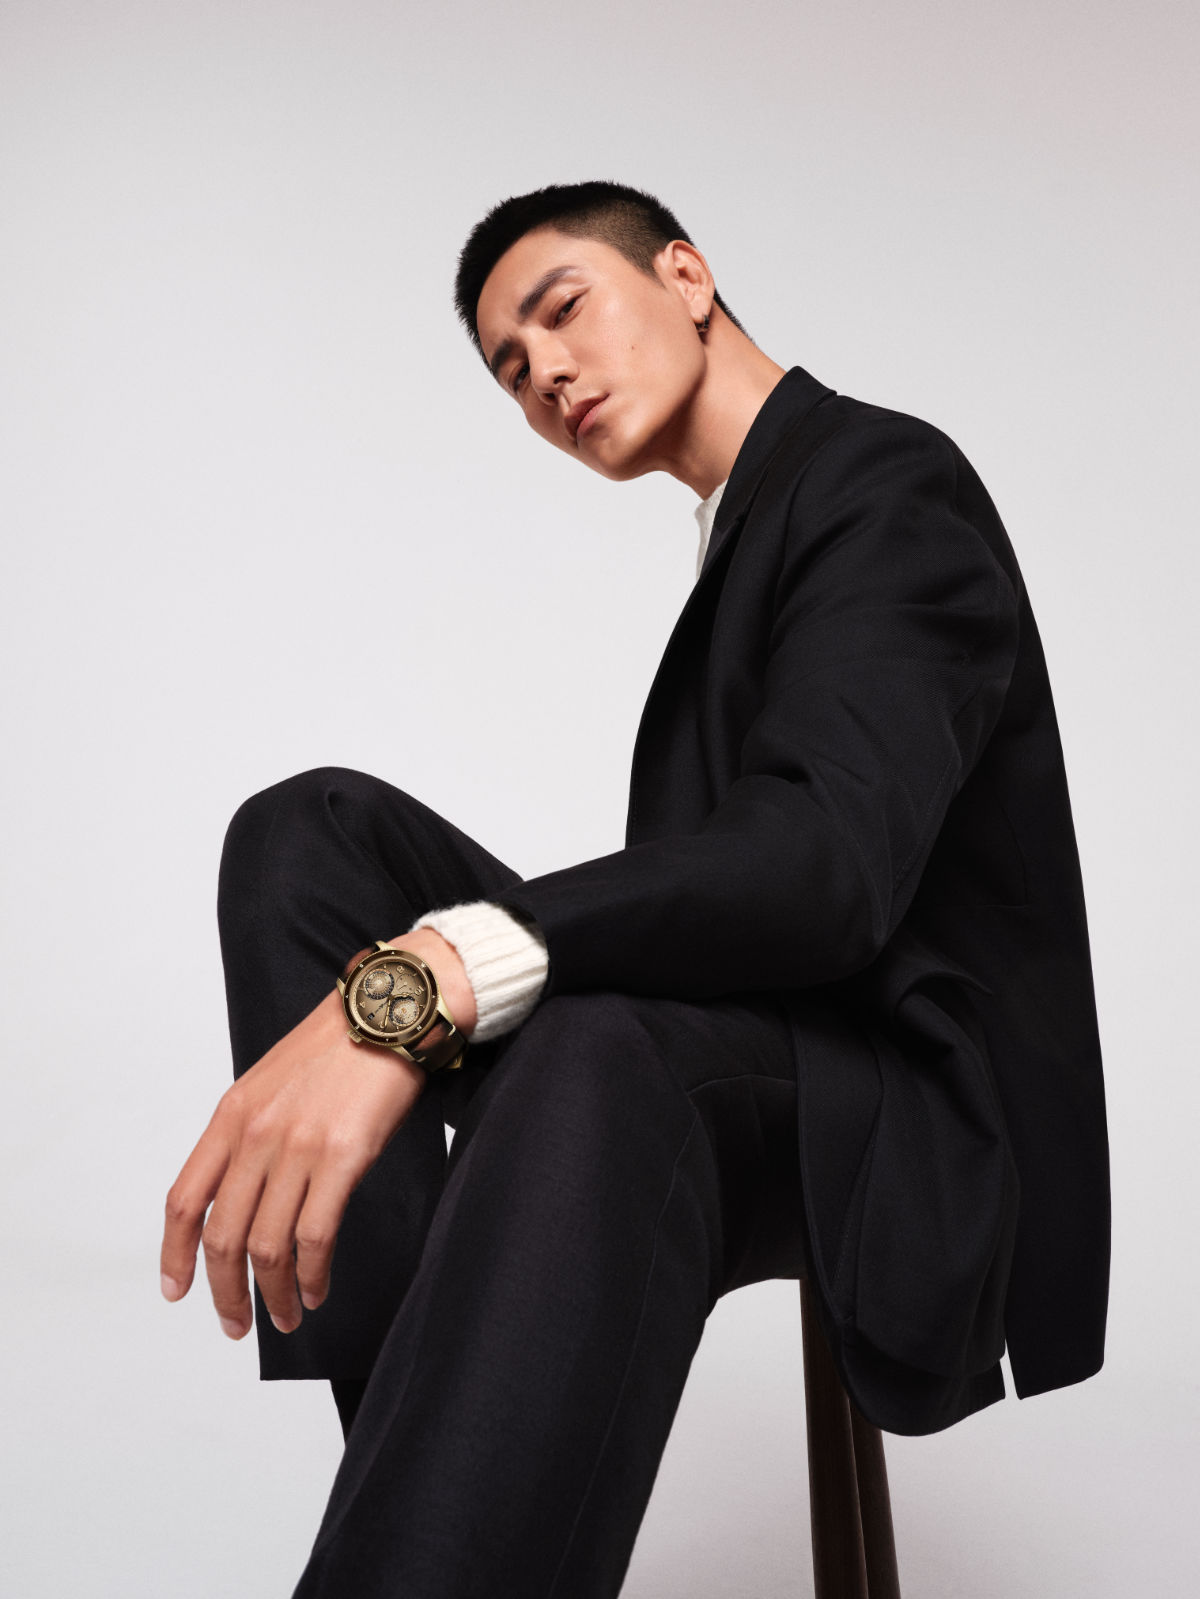 WHAT MOVES YOU, MAKES YOU - Montblanc launches 2021 brand campaign featuring Global Mark Maker Chen